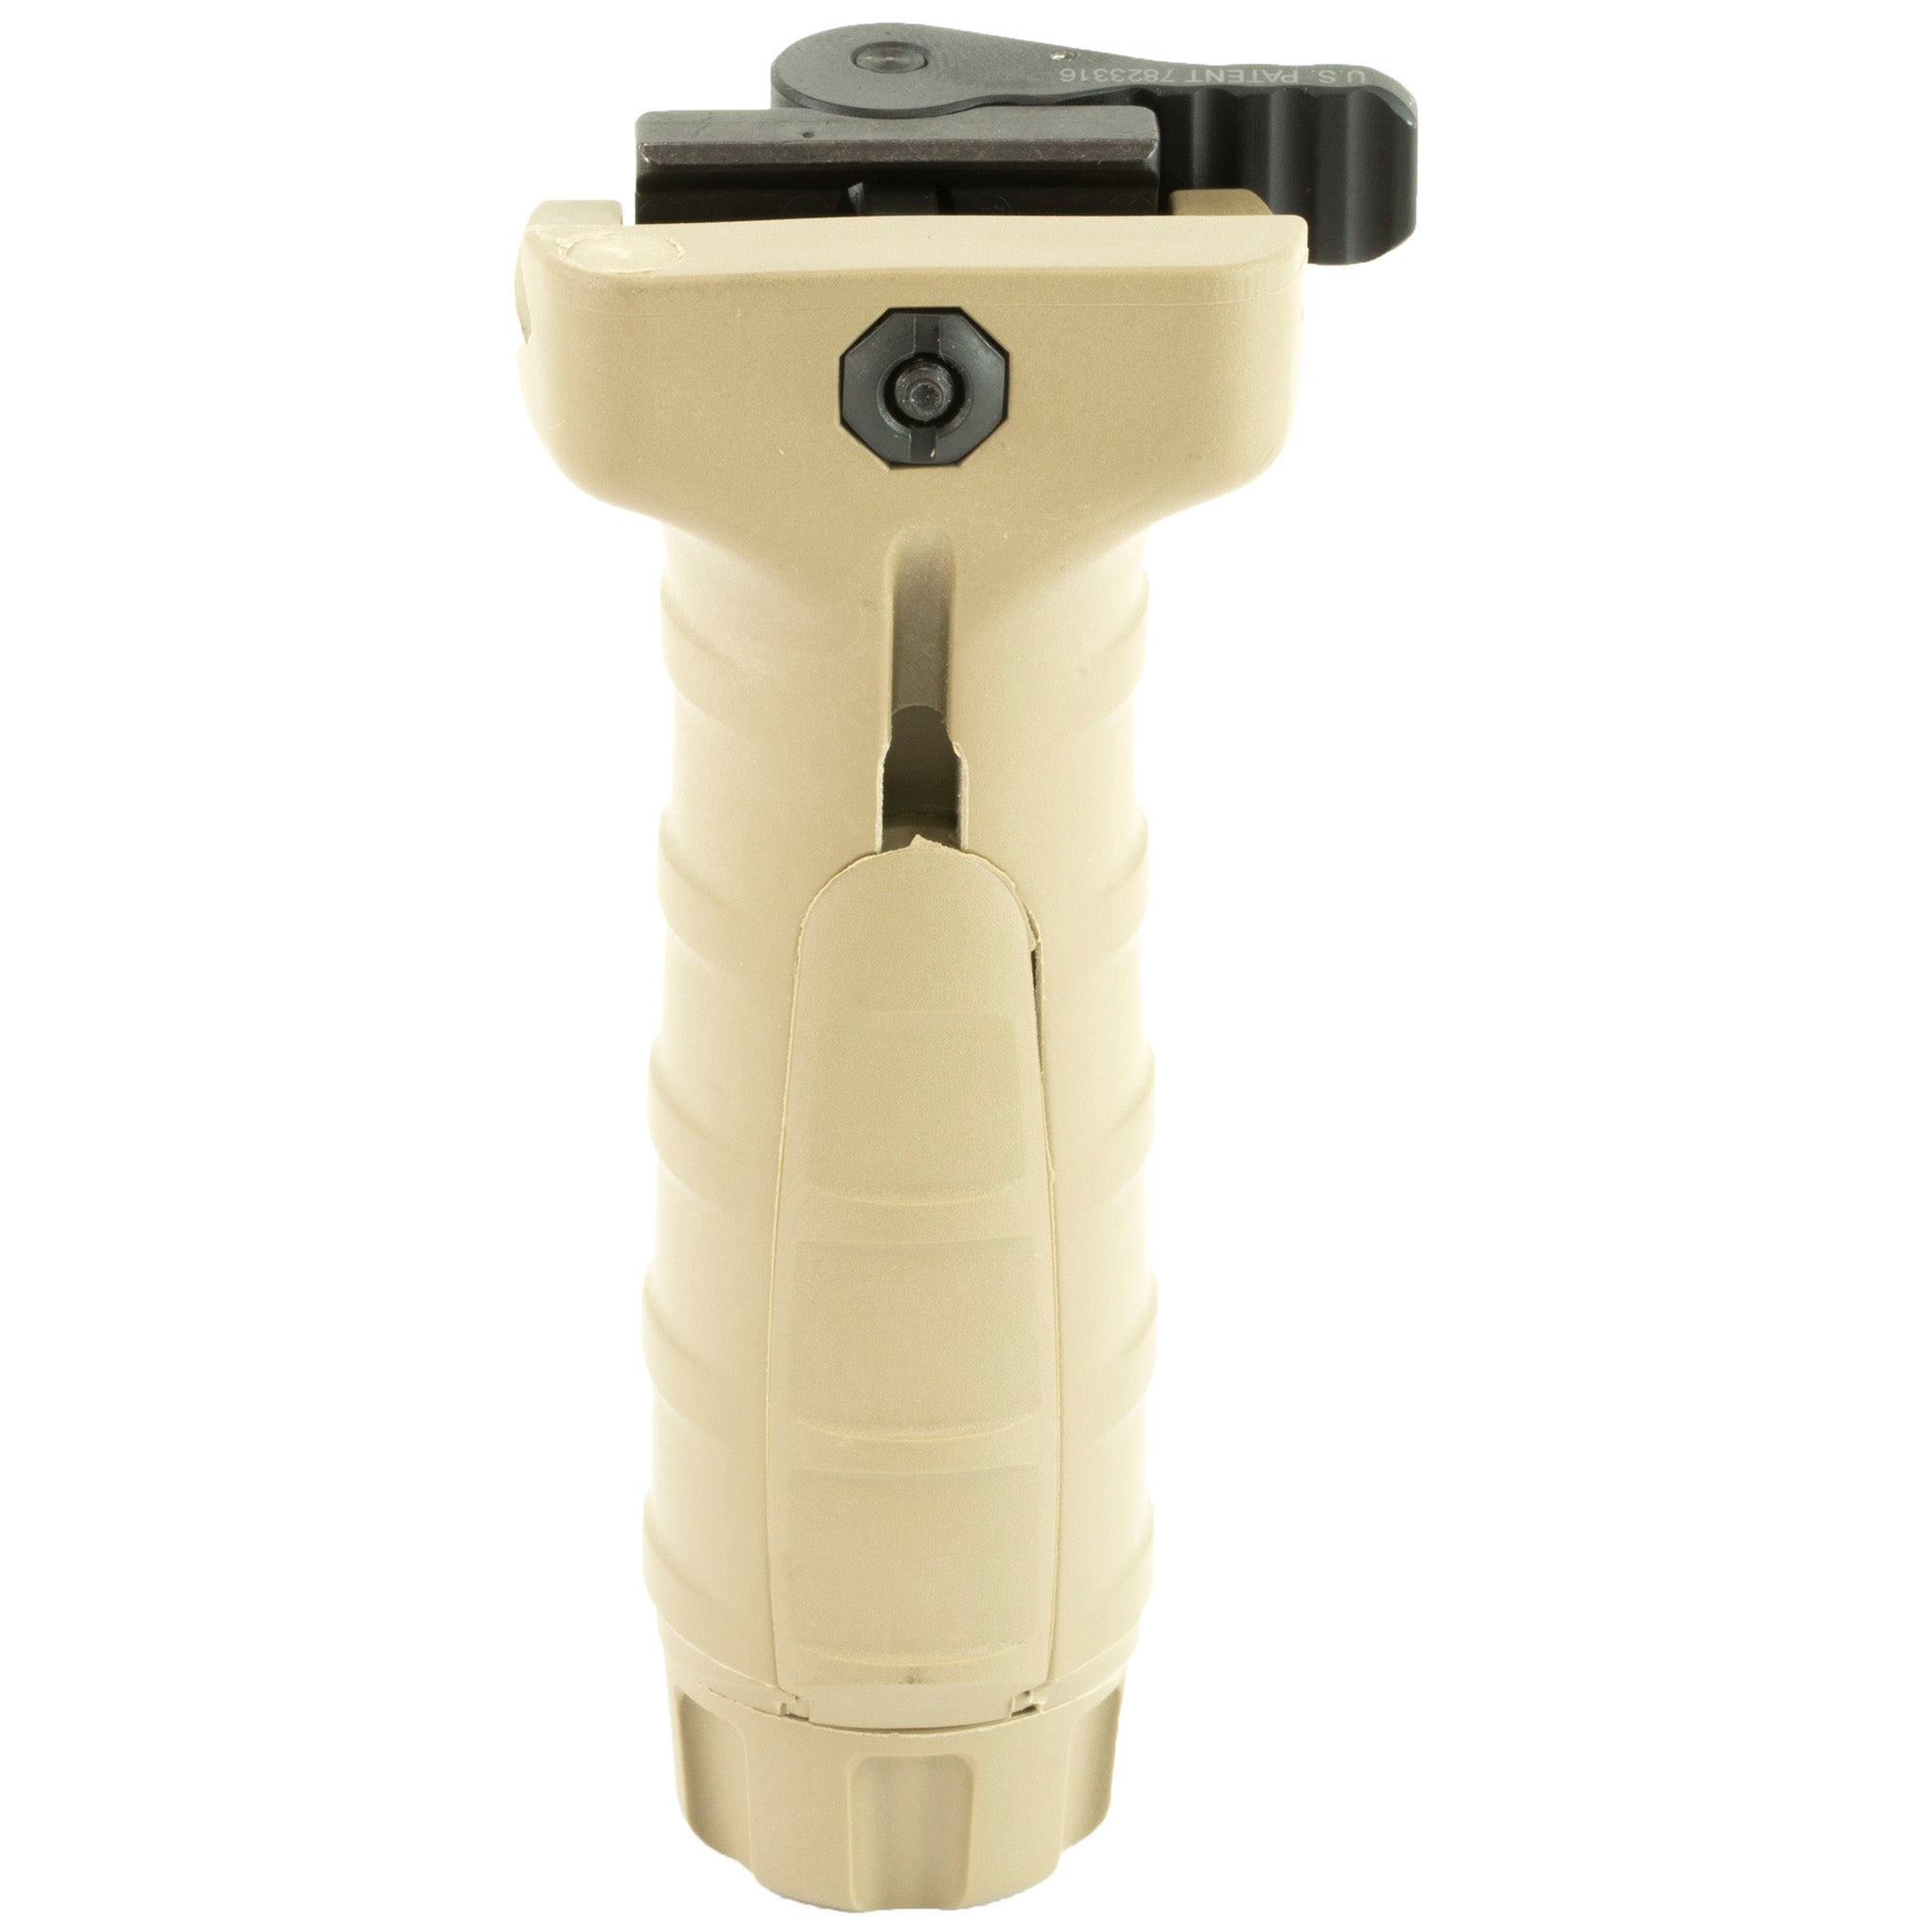 TangoDown BGV-MK46 Vertical Grip in Desert Tan, equipped with Quick Detach and Dual Lock System, for Picatinny Rails